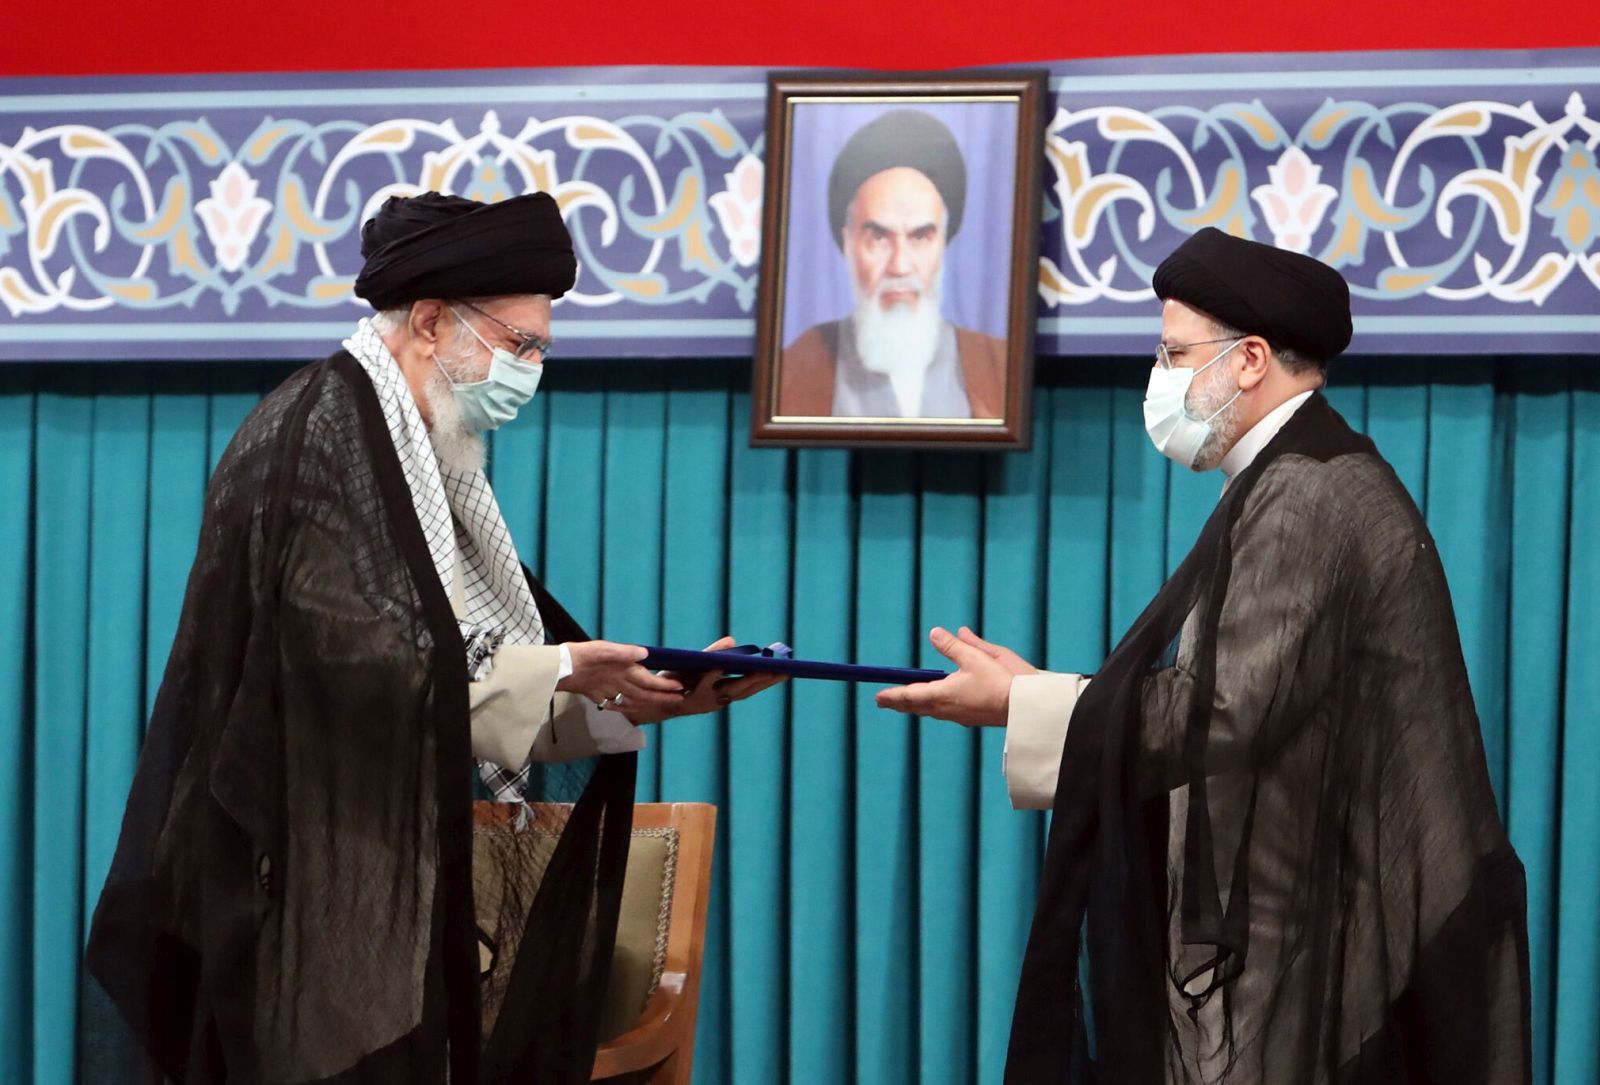 epa09389894 A handout picture made available by Iran's Supreme Leader Office shows Iranian supreme leader Ayatollah Ali khamenei (L) handing over the presidential precept to new Iranian president Ebrahim Raisi (R), in Tehran, Iran, 03 August 2021. Iranian presidents are first approved by the supreme leader, who according to constitution is the actual head of state, and then take the oath before parliament. Ebrahim Raisi has been inaugurated as the new president of the Islamic Republic of Iran on 03 August 2021, as the country is facing an economic crisis along with the coronavirus disease (COVID-19) pandemic.  EPA/IRAN'S SUPREME LEADER OFFICE HANDOUT  HANDOUT EDITORIAL USE ONLY/NO SALES